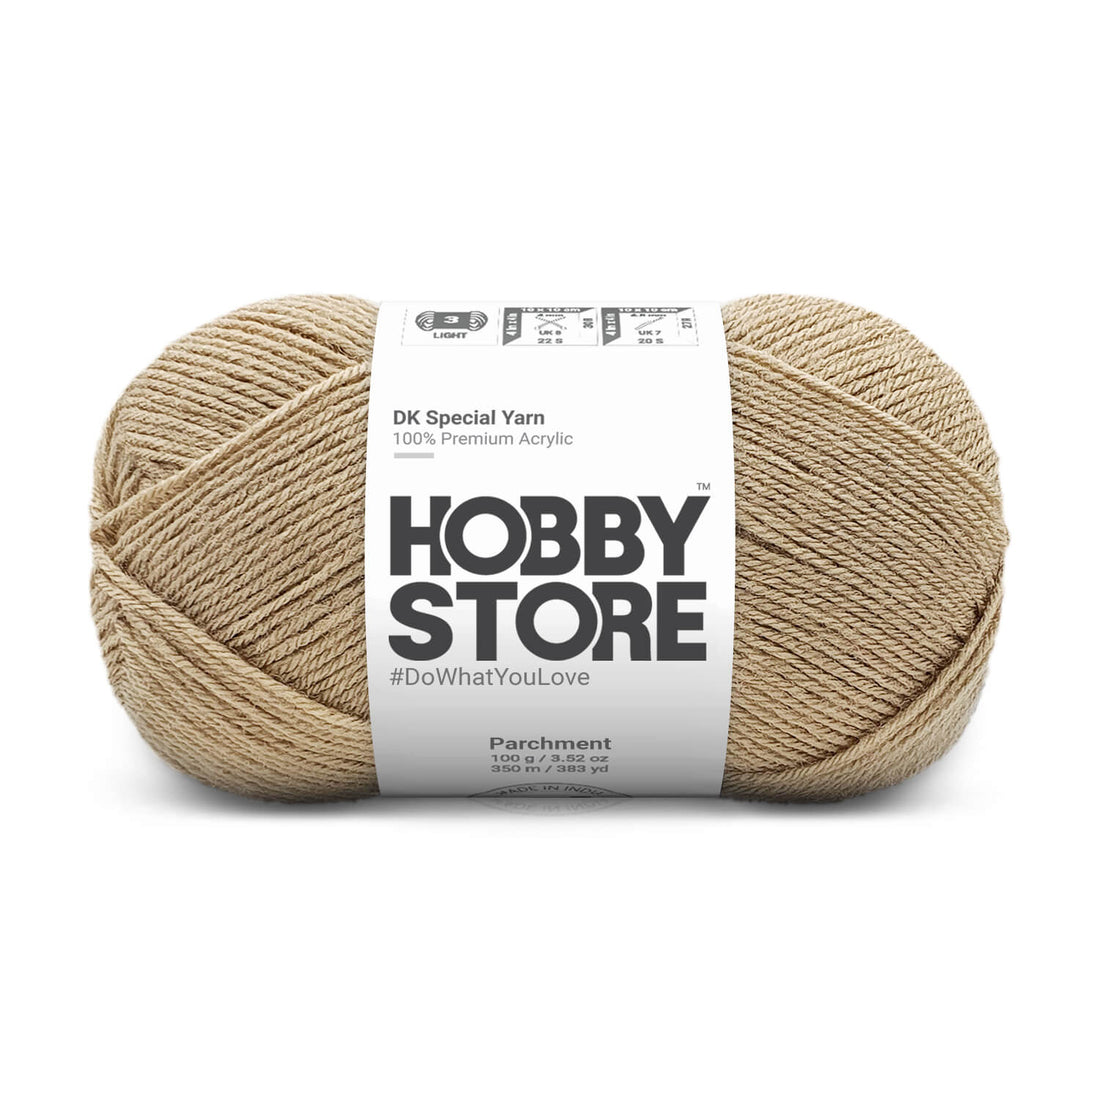 Hobby Store DK Special Yarn - Parchment 1218